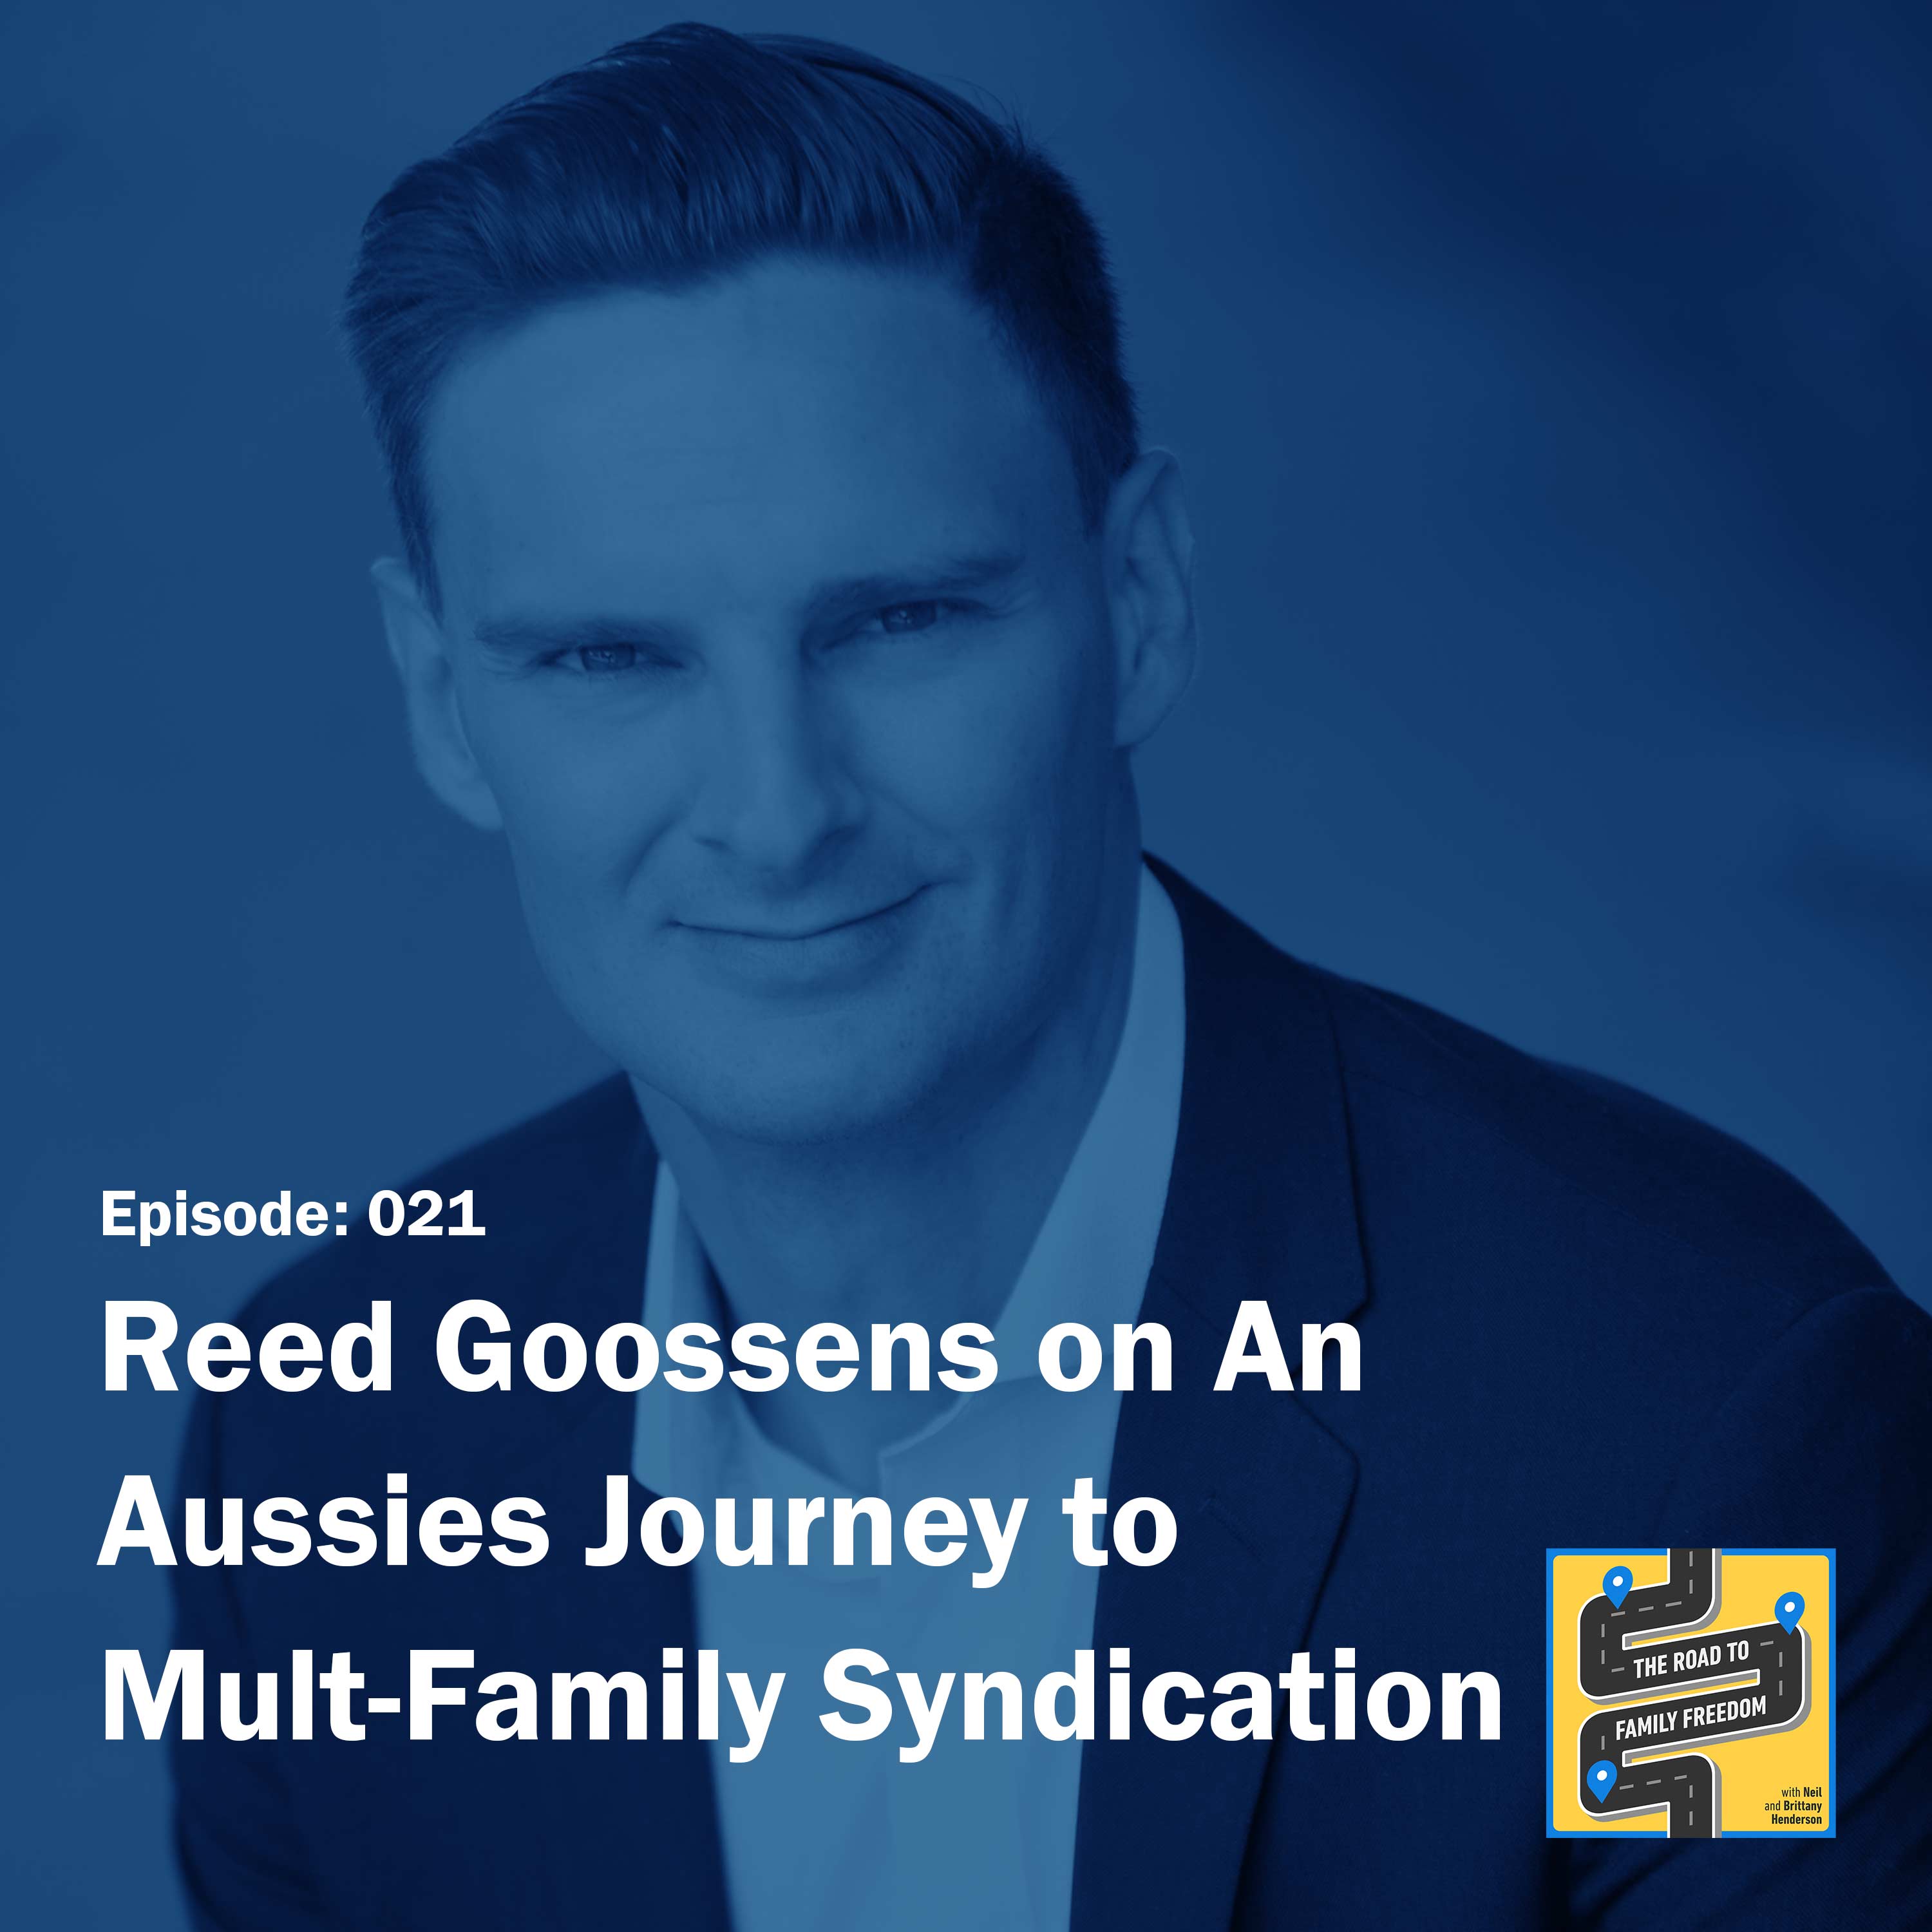 An Aussie’s Journey to Multi-Family Syndication with Reed Goossens